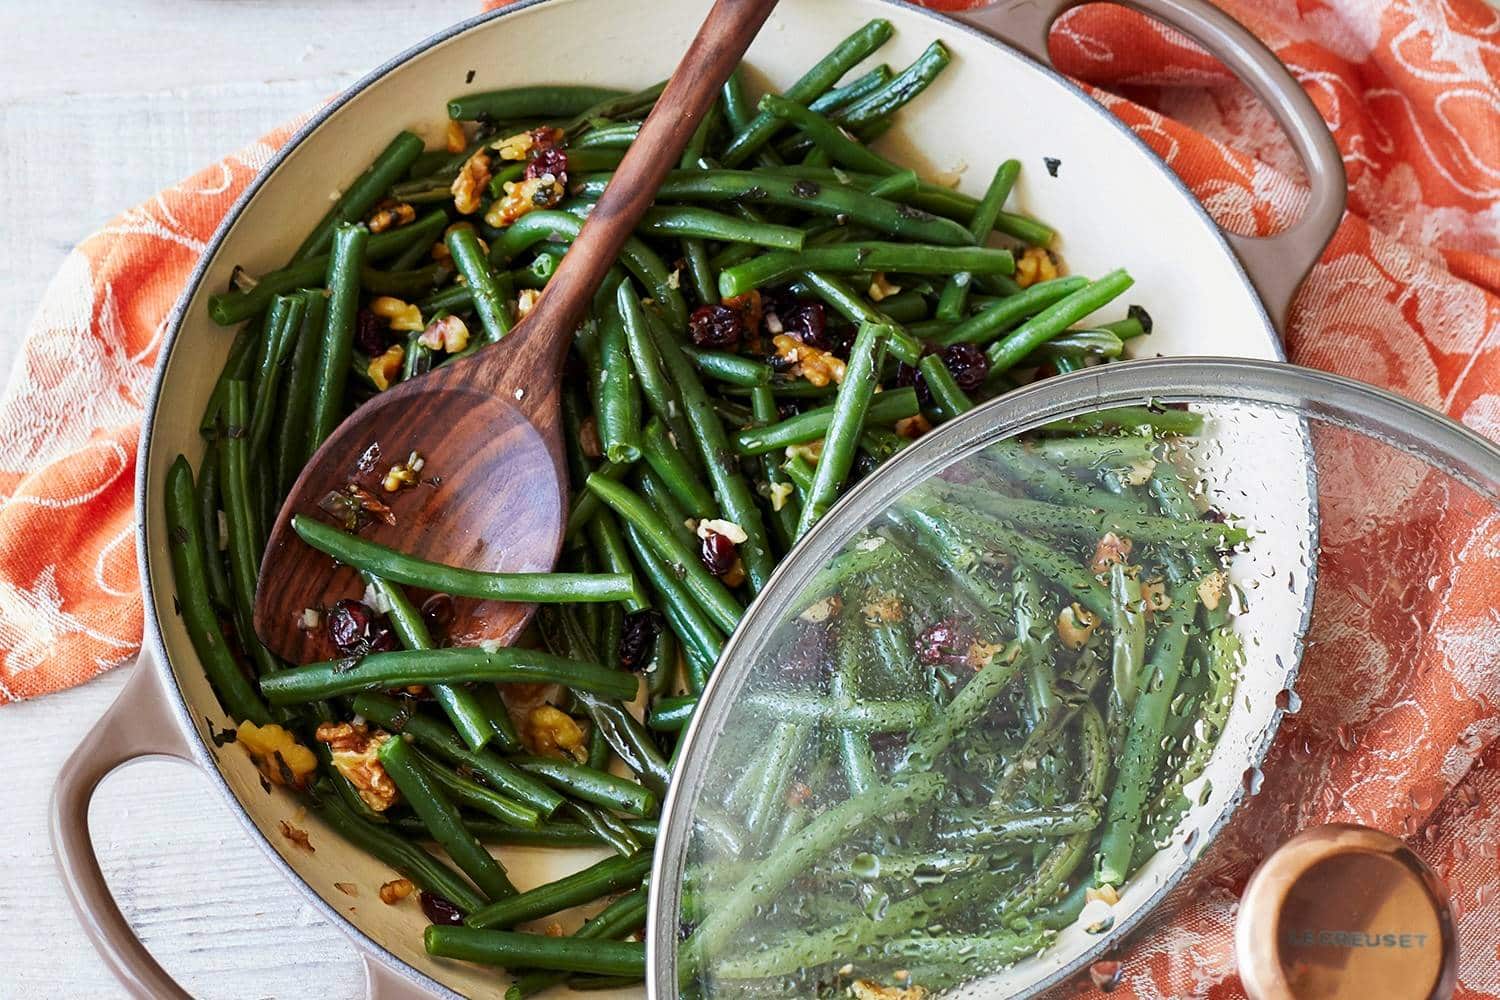 Get the Green Beans with Walnuts and Cranberries recipe!